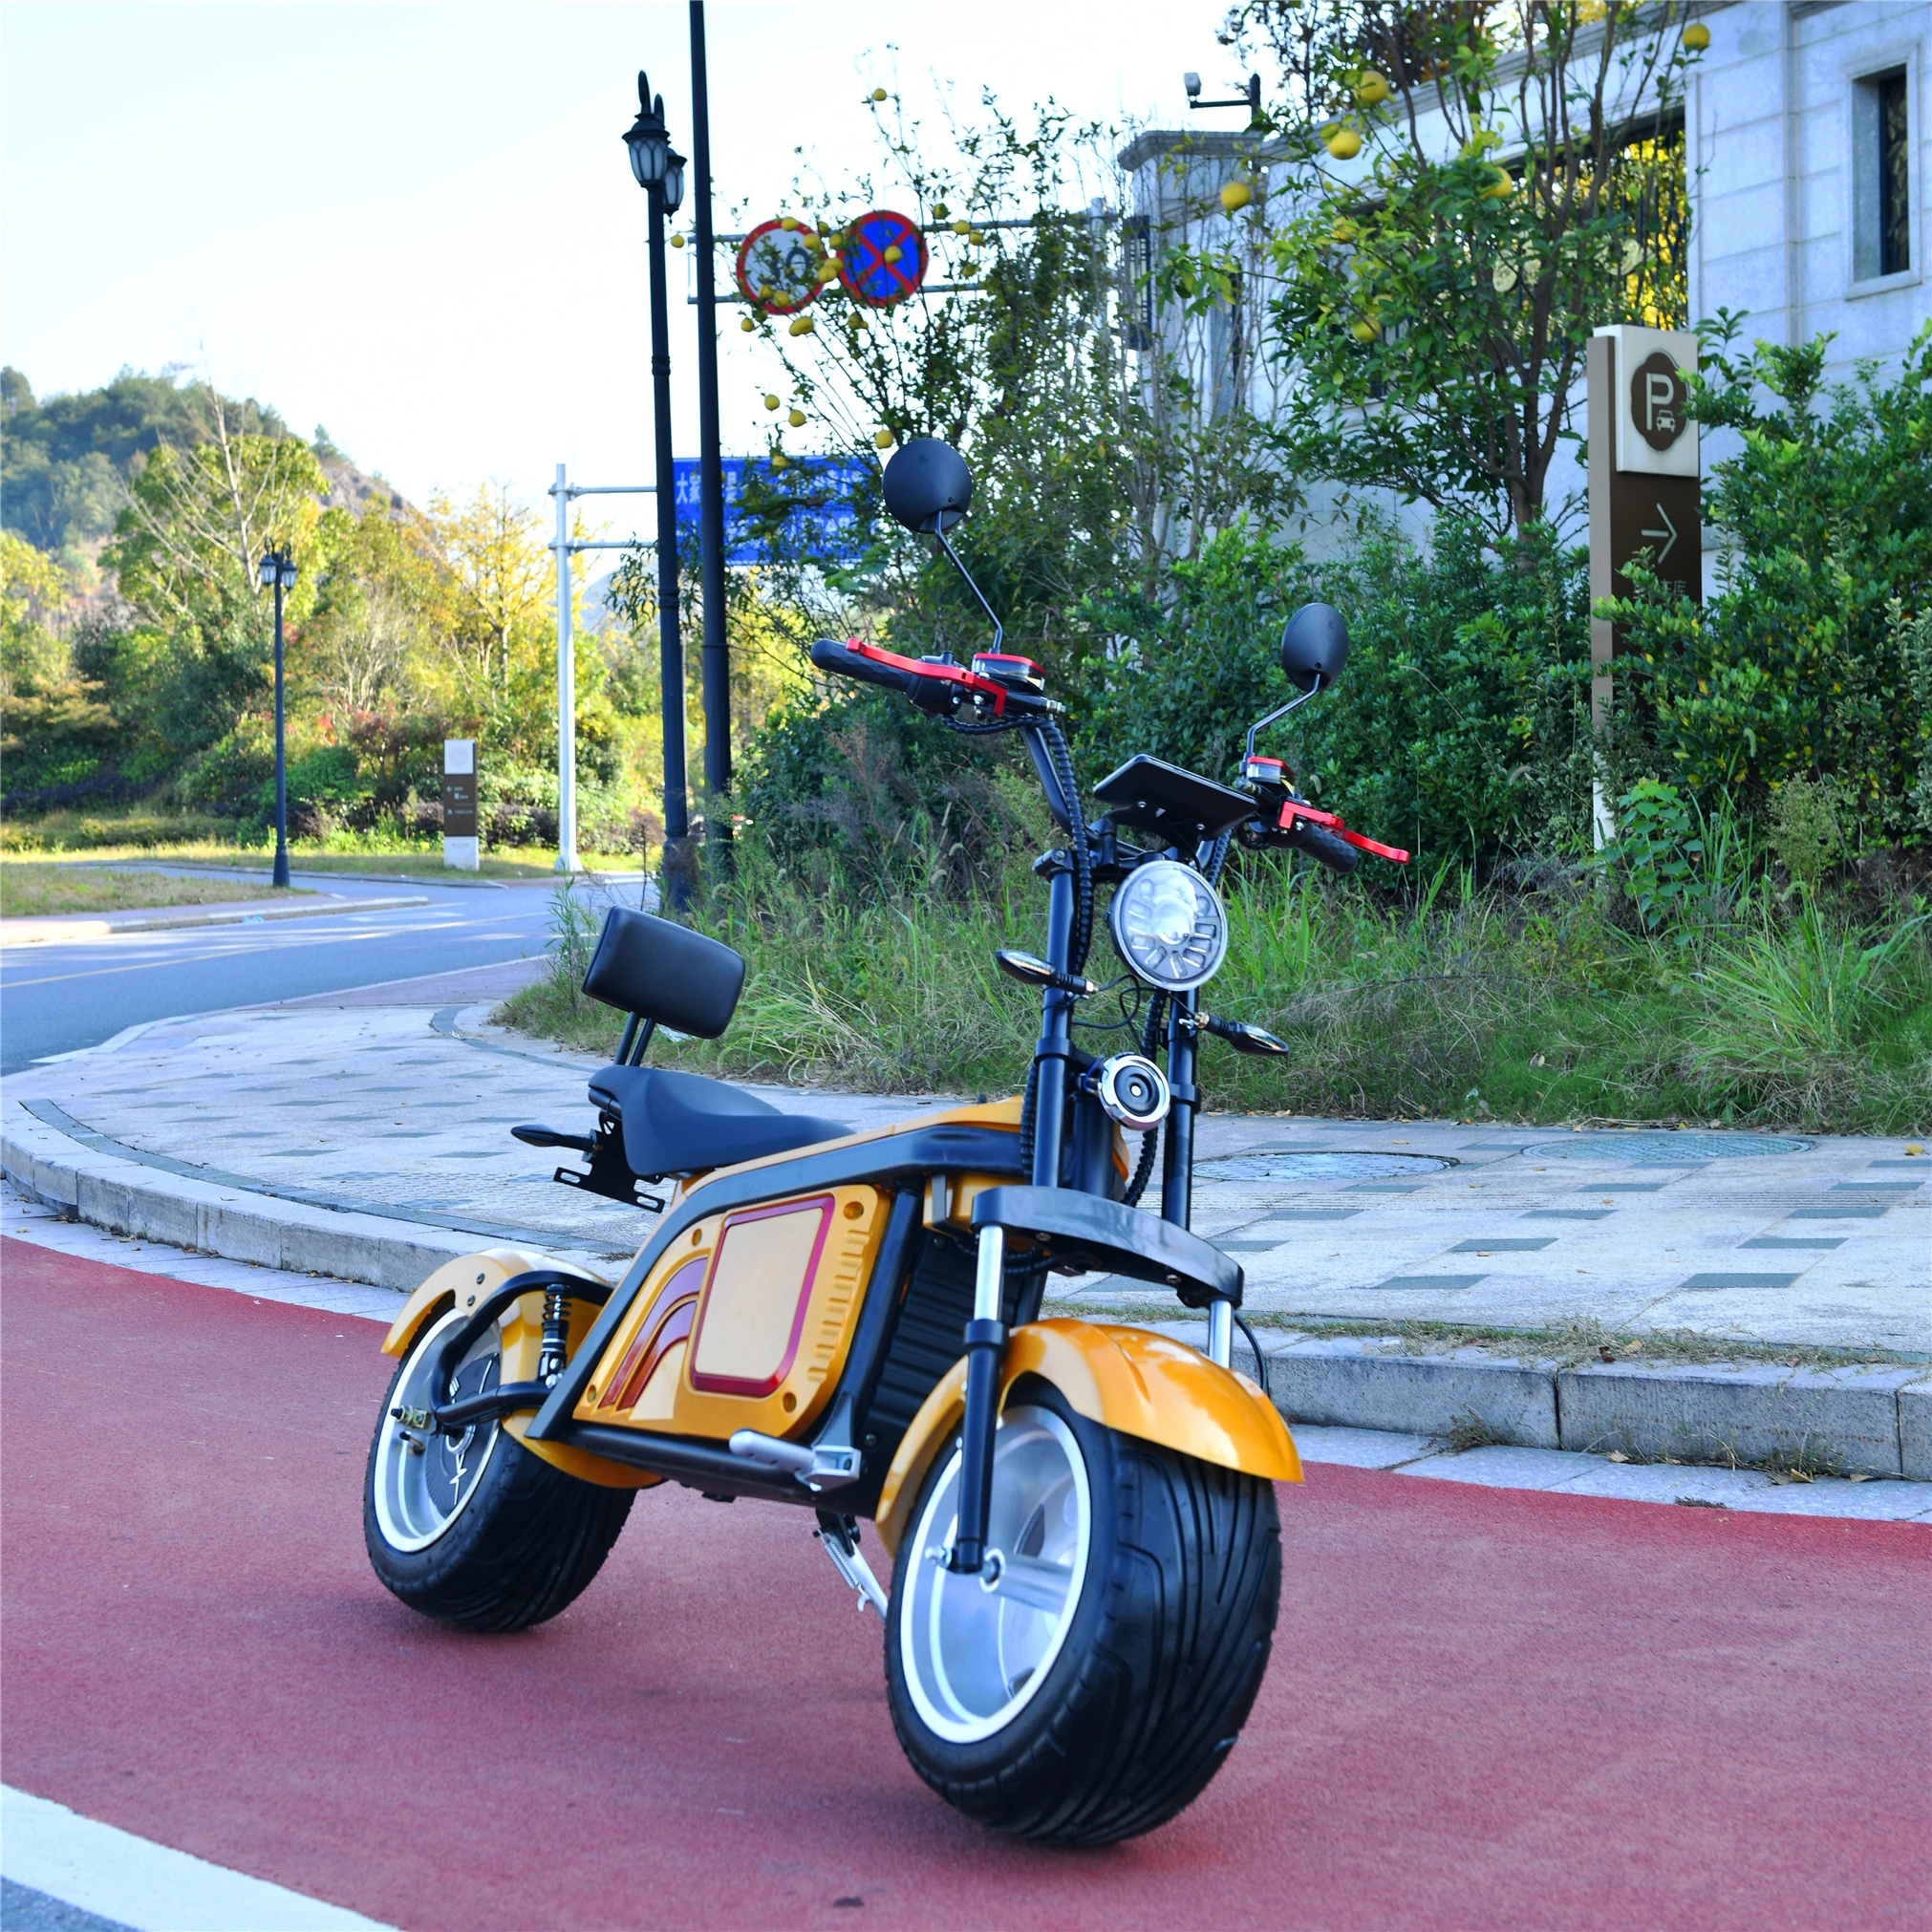 

2000W 72v 30AH electric scooter/ Man smart Electric Motorcycle Price from China Manufacturer with Best Quality, Blue red black